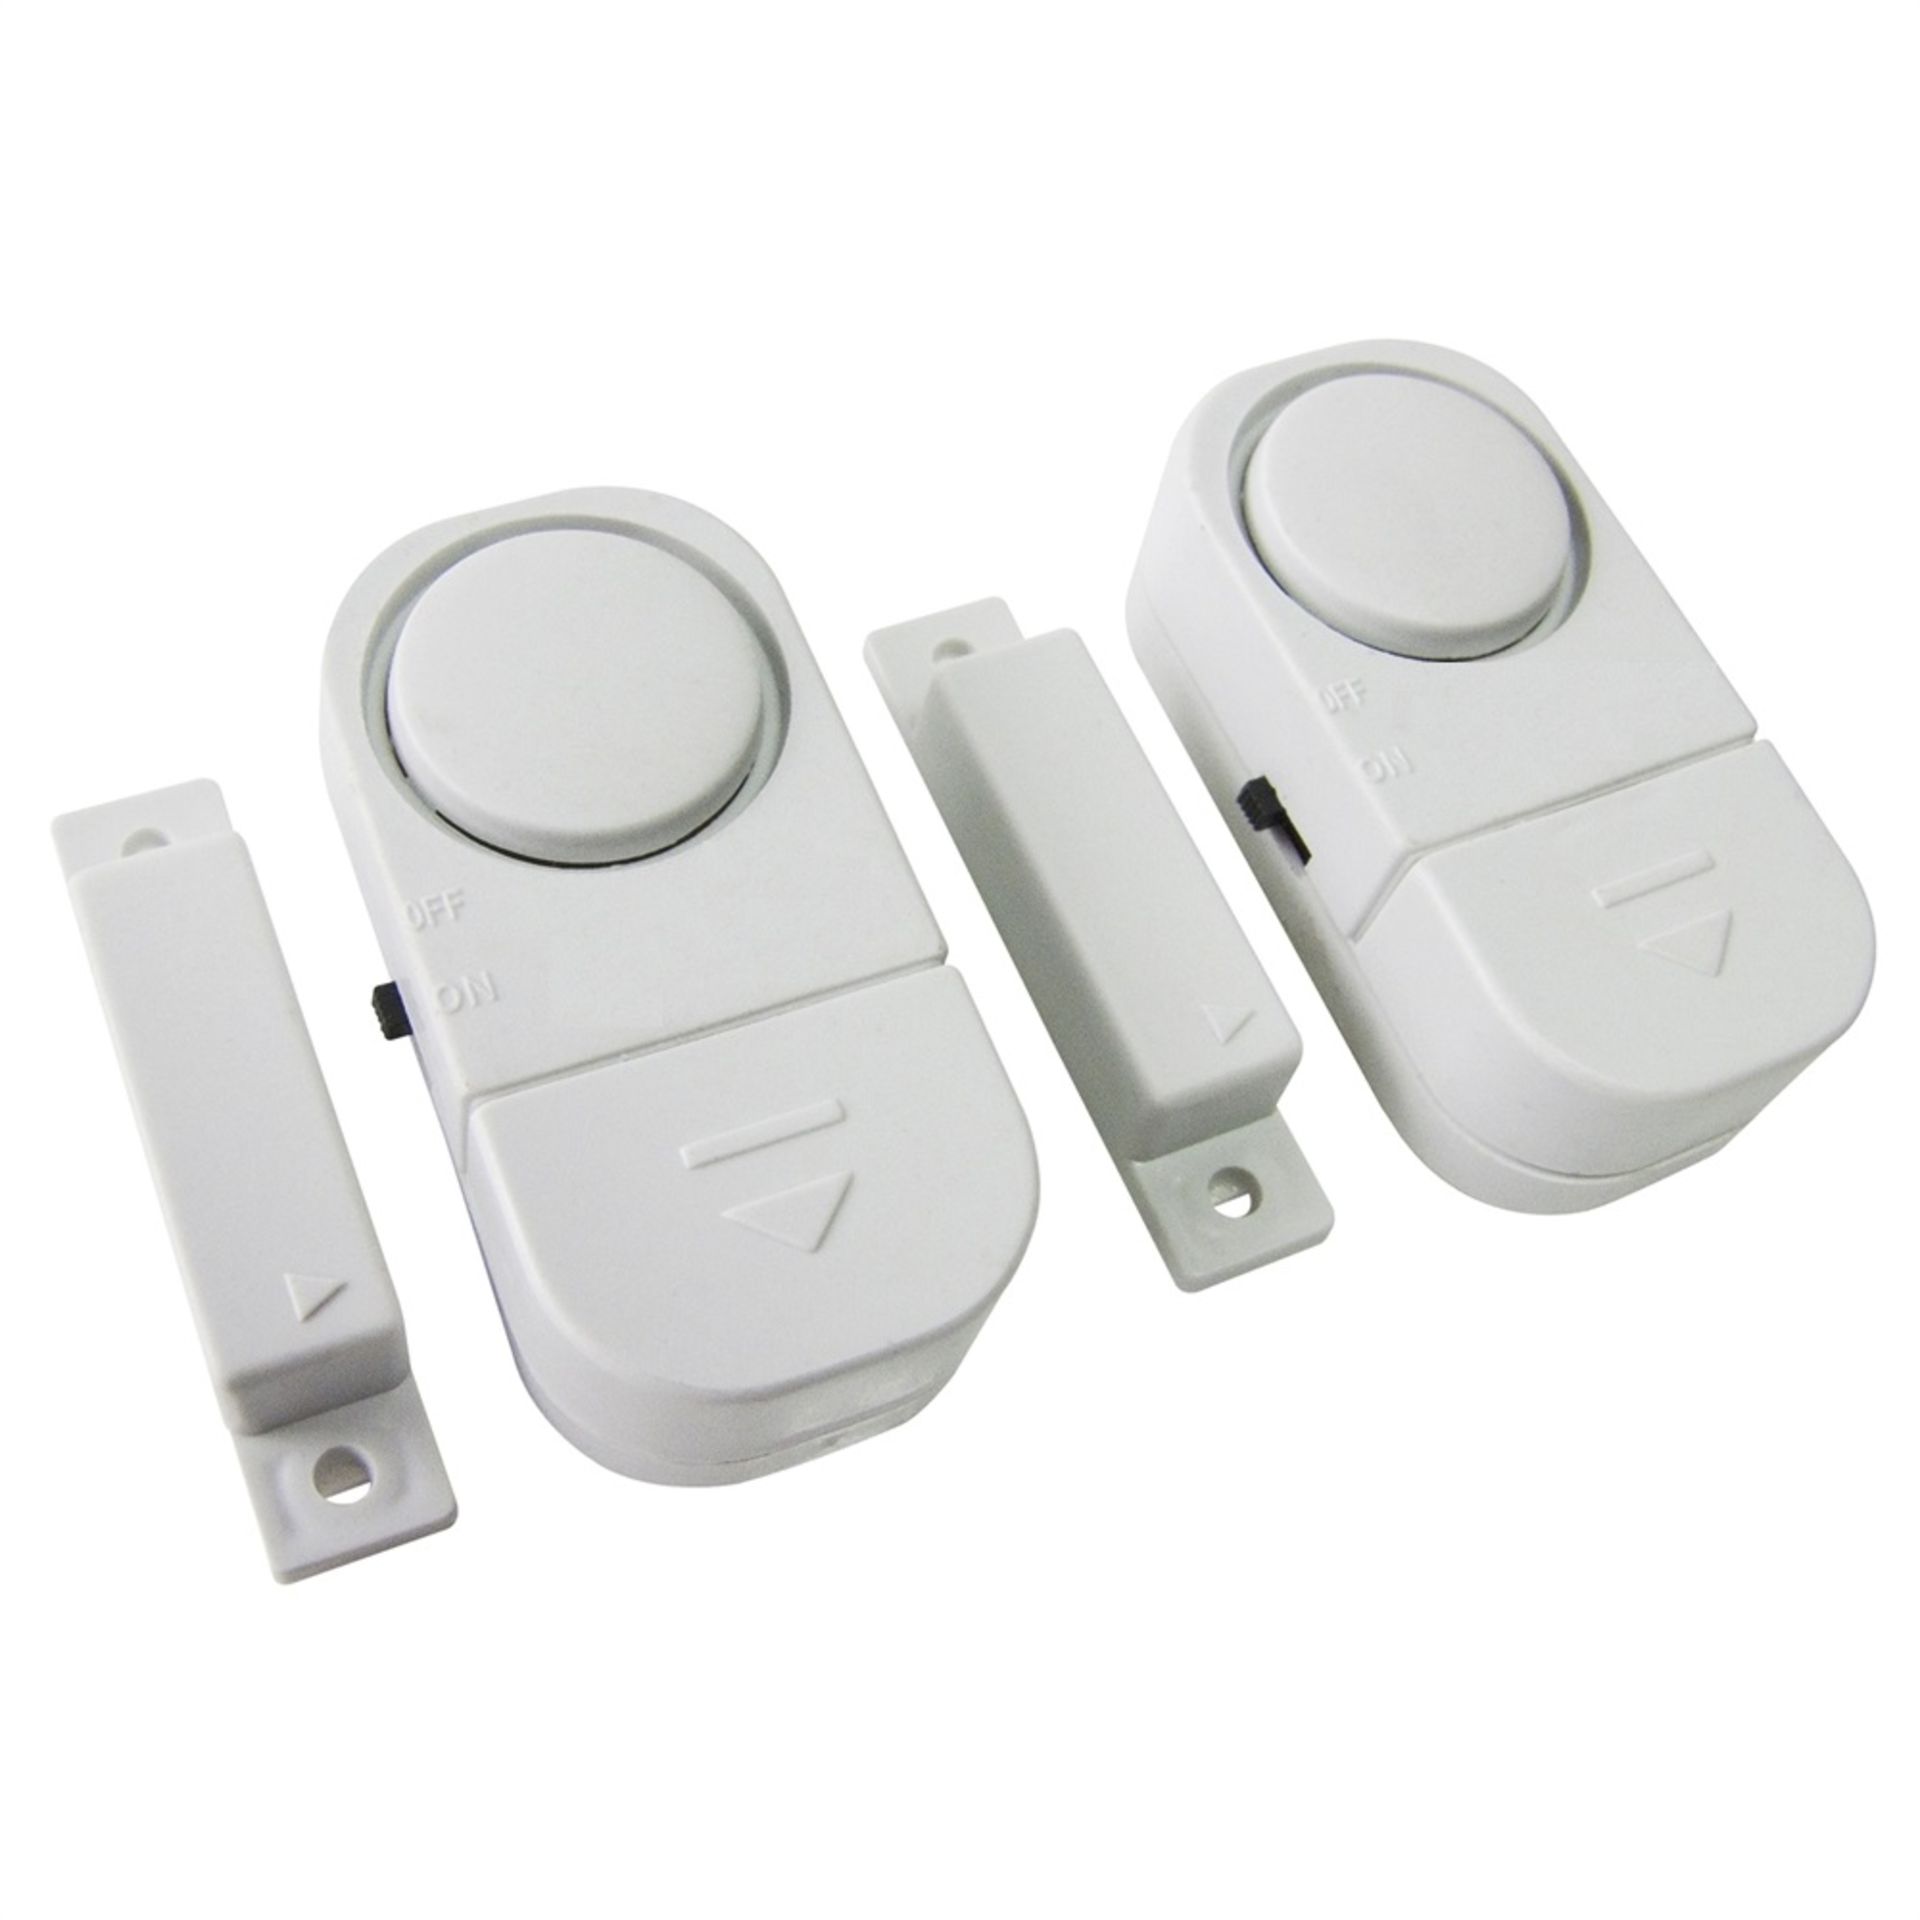 V *TRADE QTY* Brand New 2 Piece Door And Window Entry Alarm Set X 5 YOUR BID PRICE TO BE